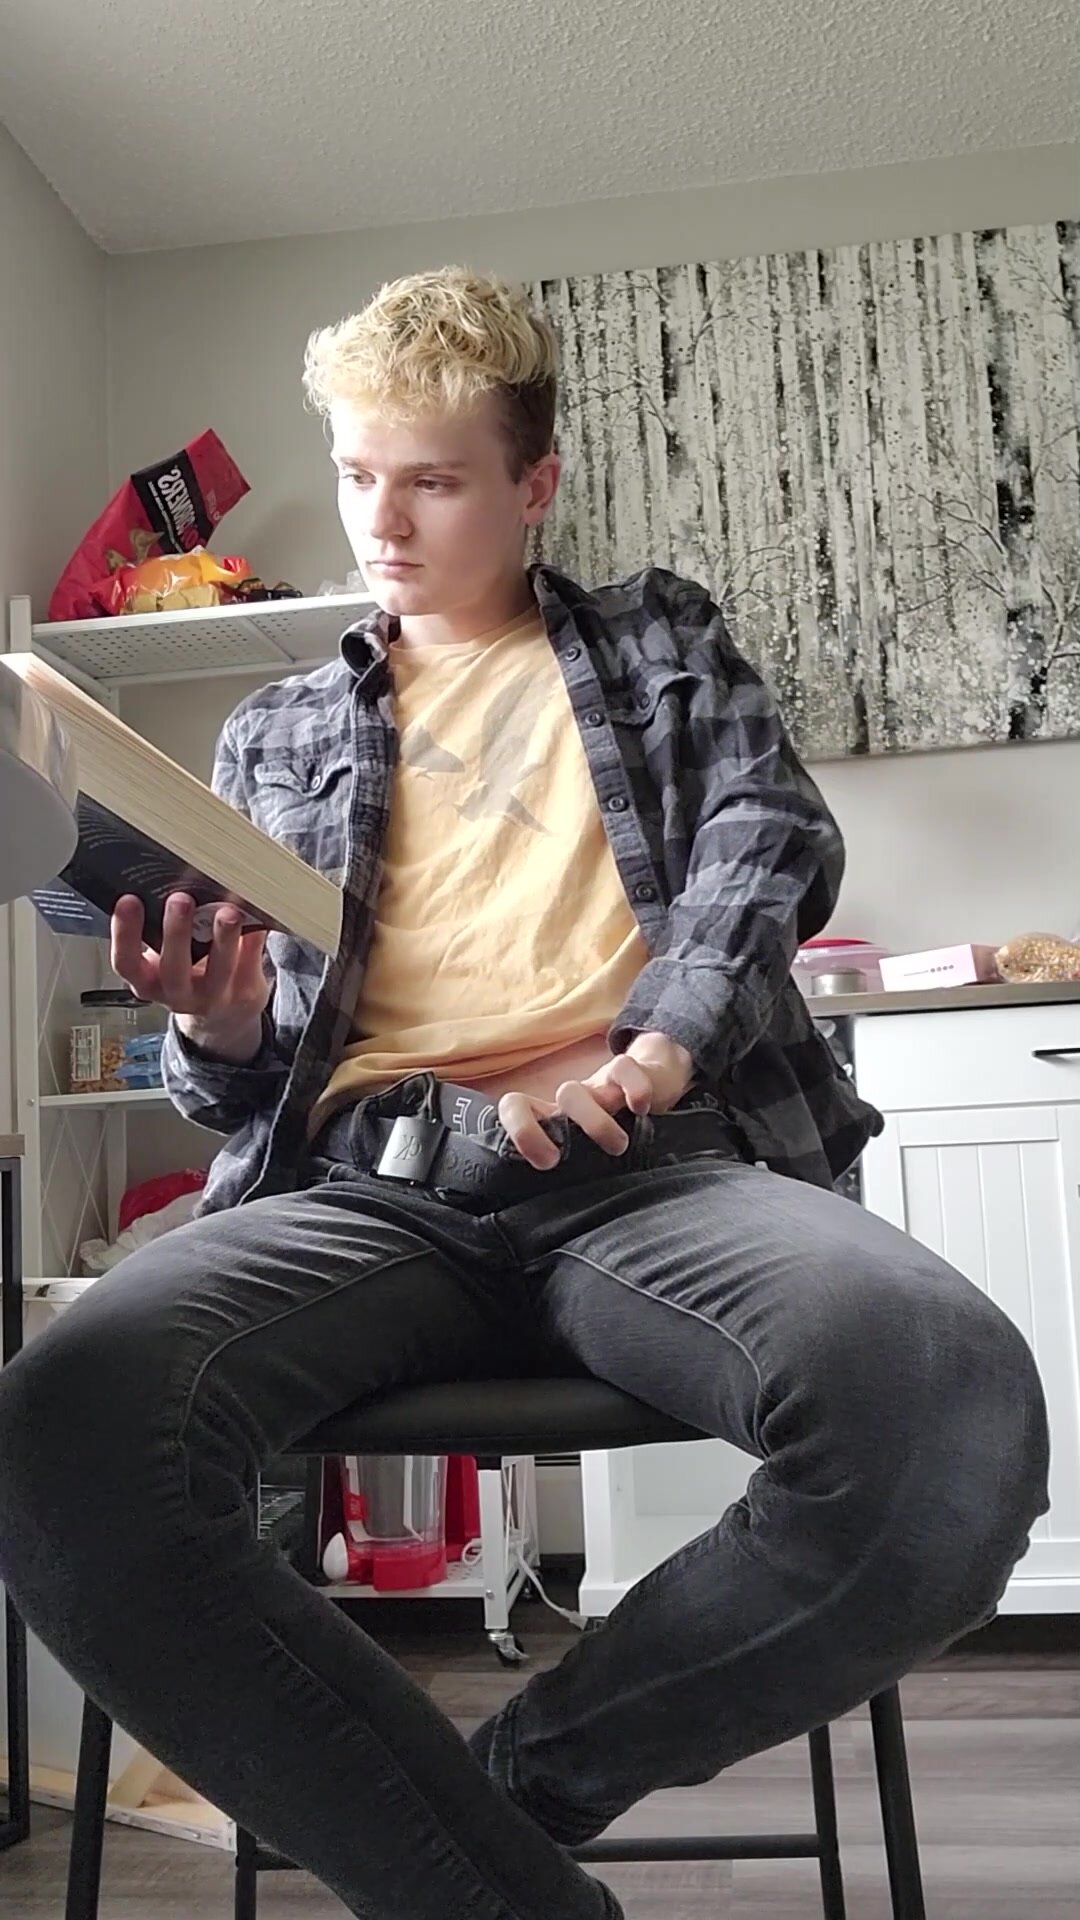 Twink pisses all over the floor while reading a book